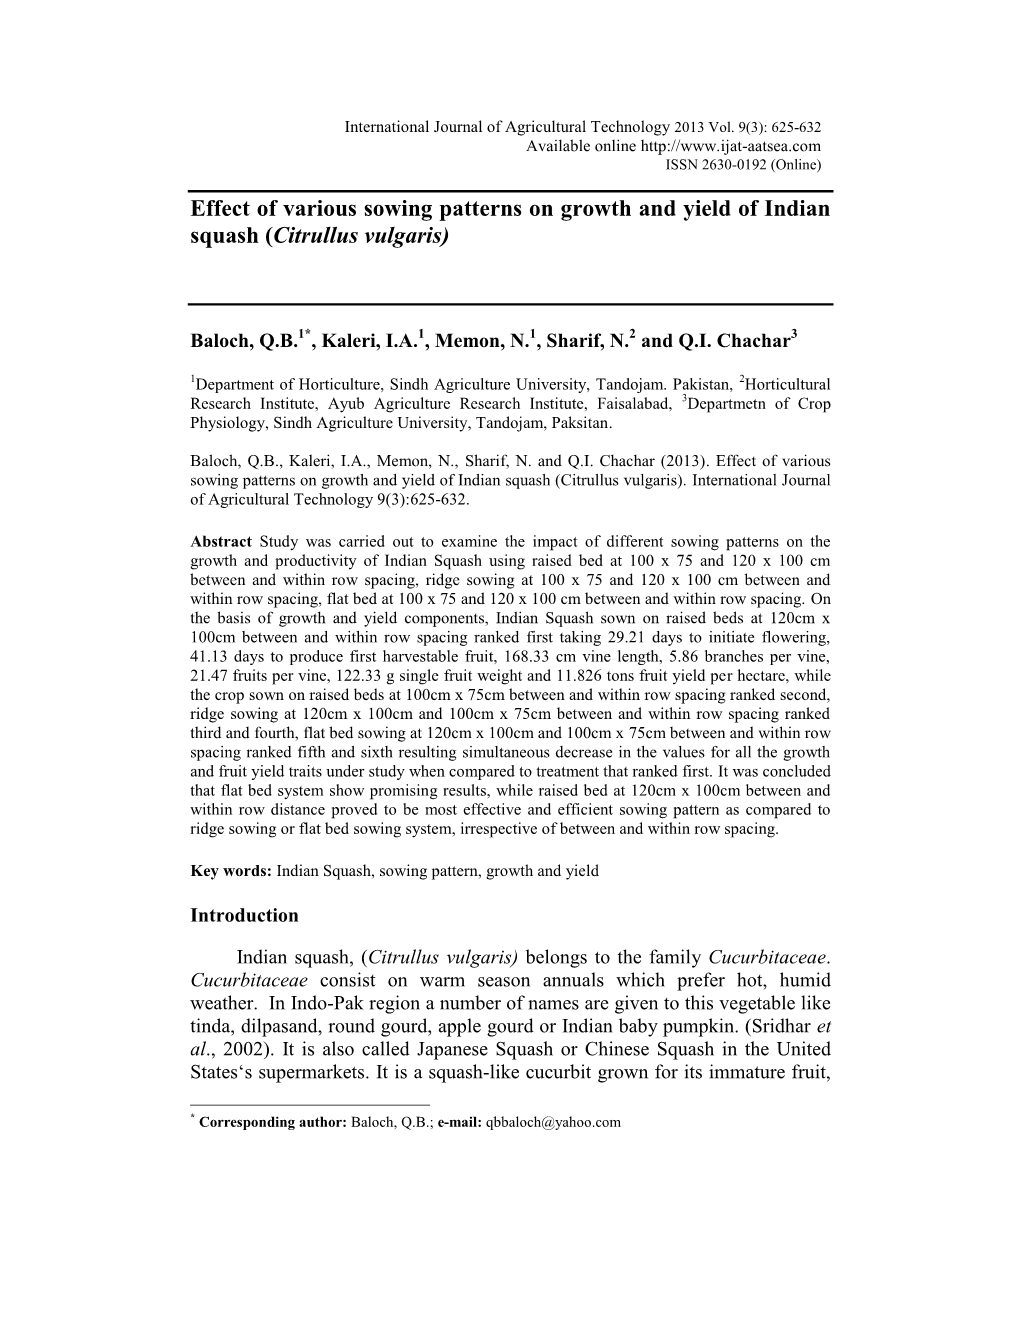 Effect of Various Sowing Patterns on Growth and Yield of Indian Squash (Citrullus Vulgaris)